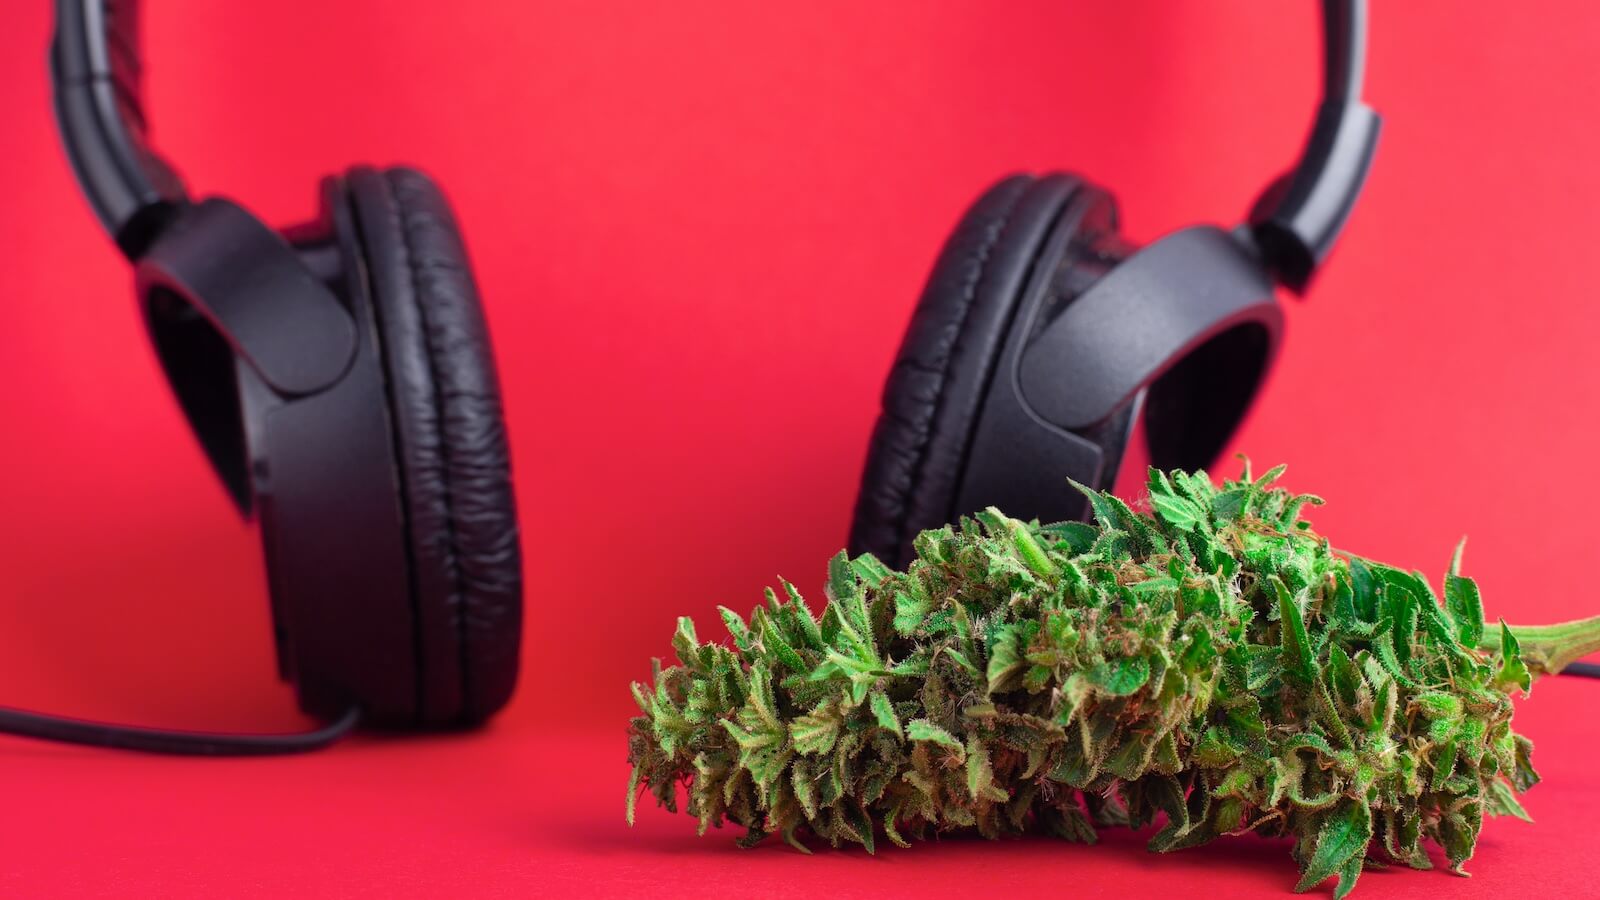 Should you play music to your cannabis plants?